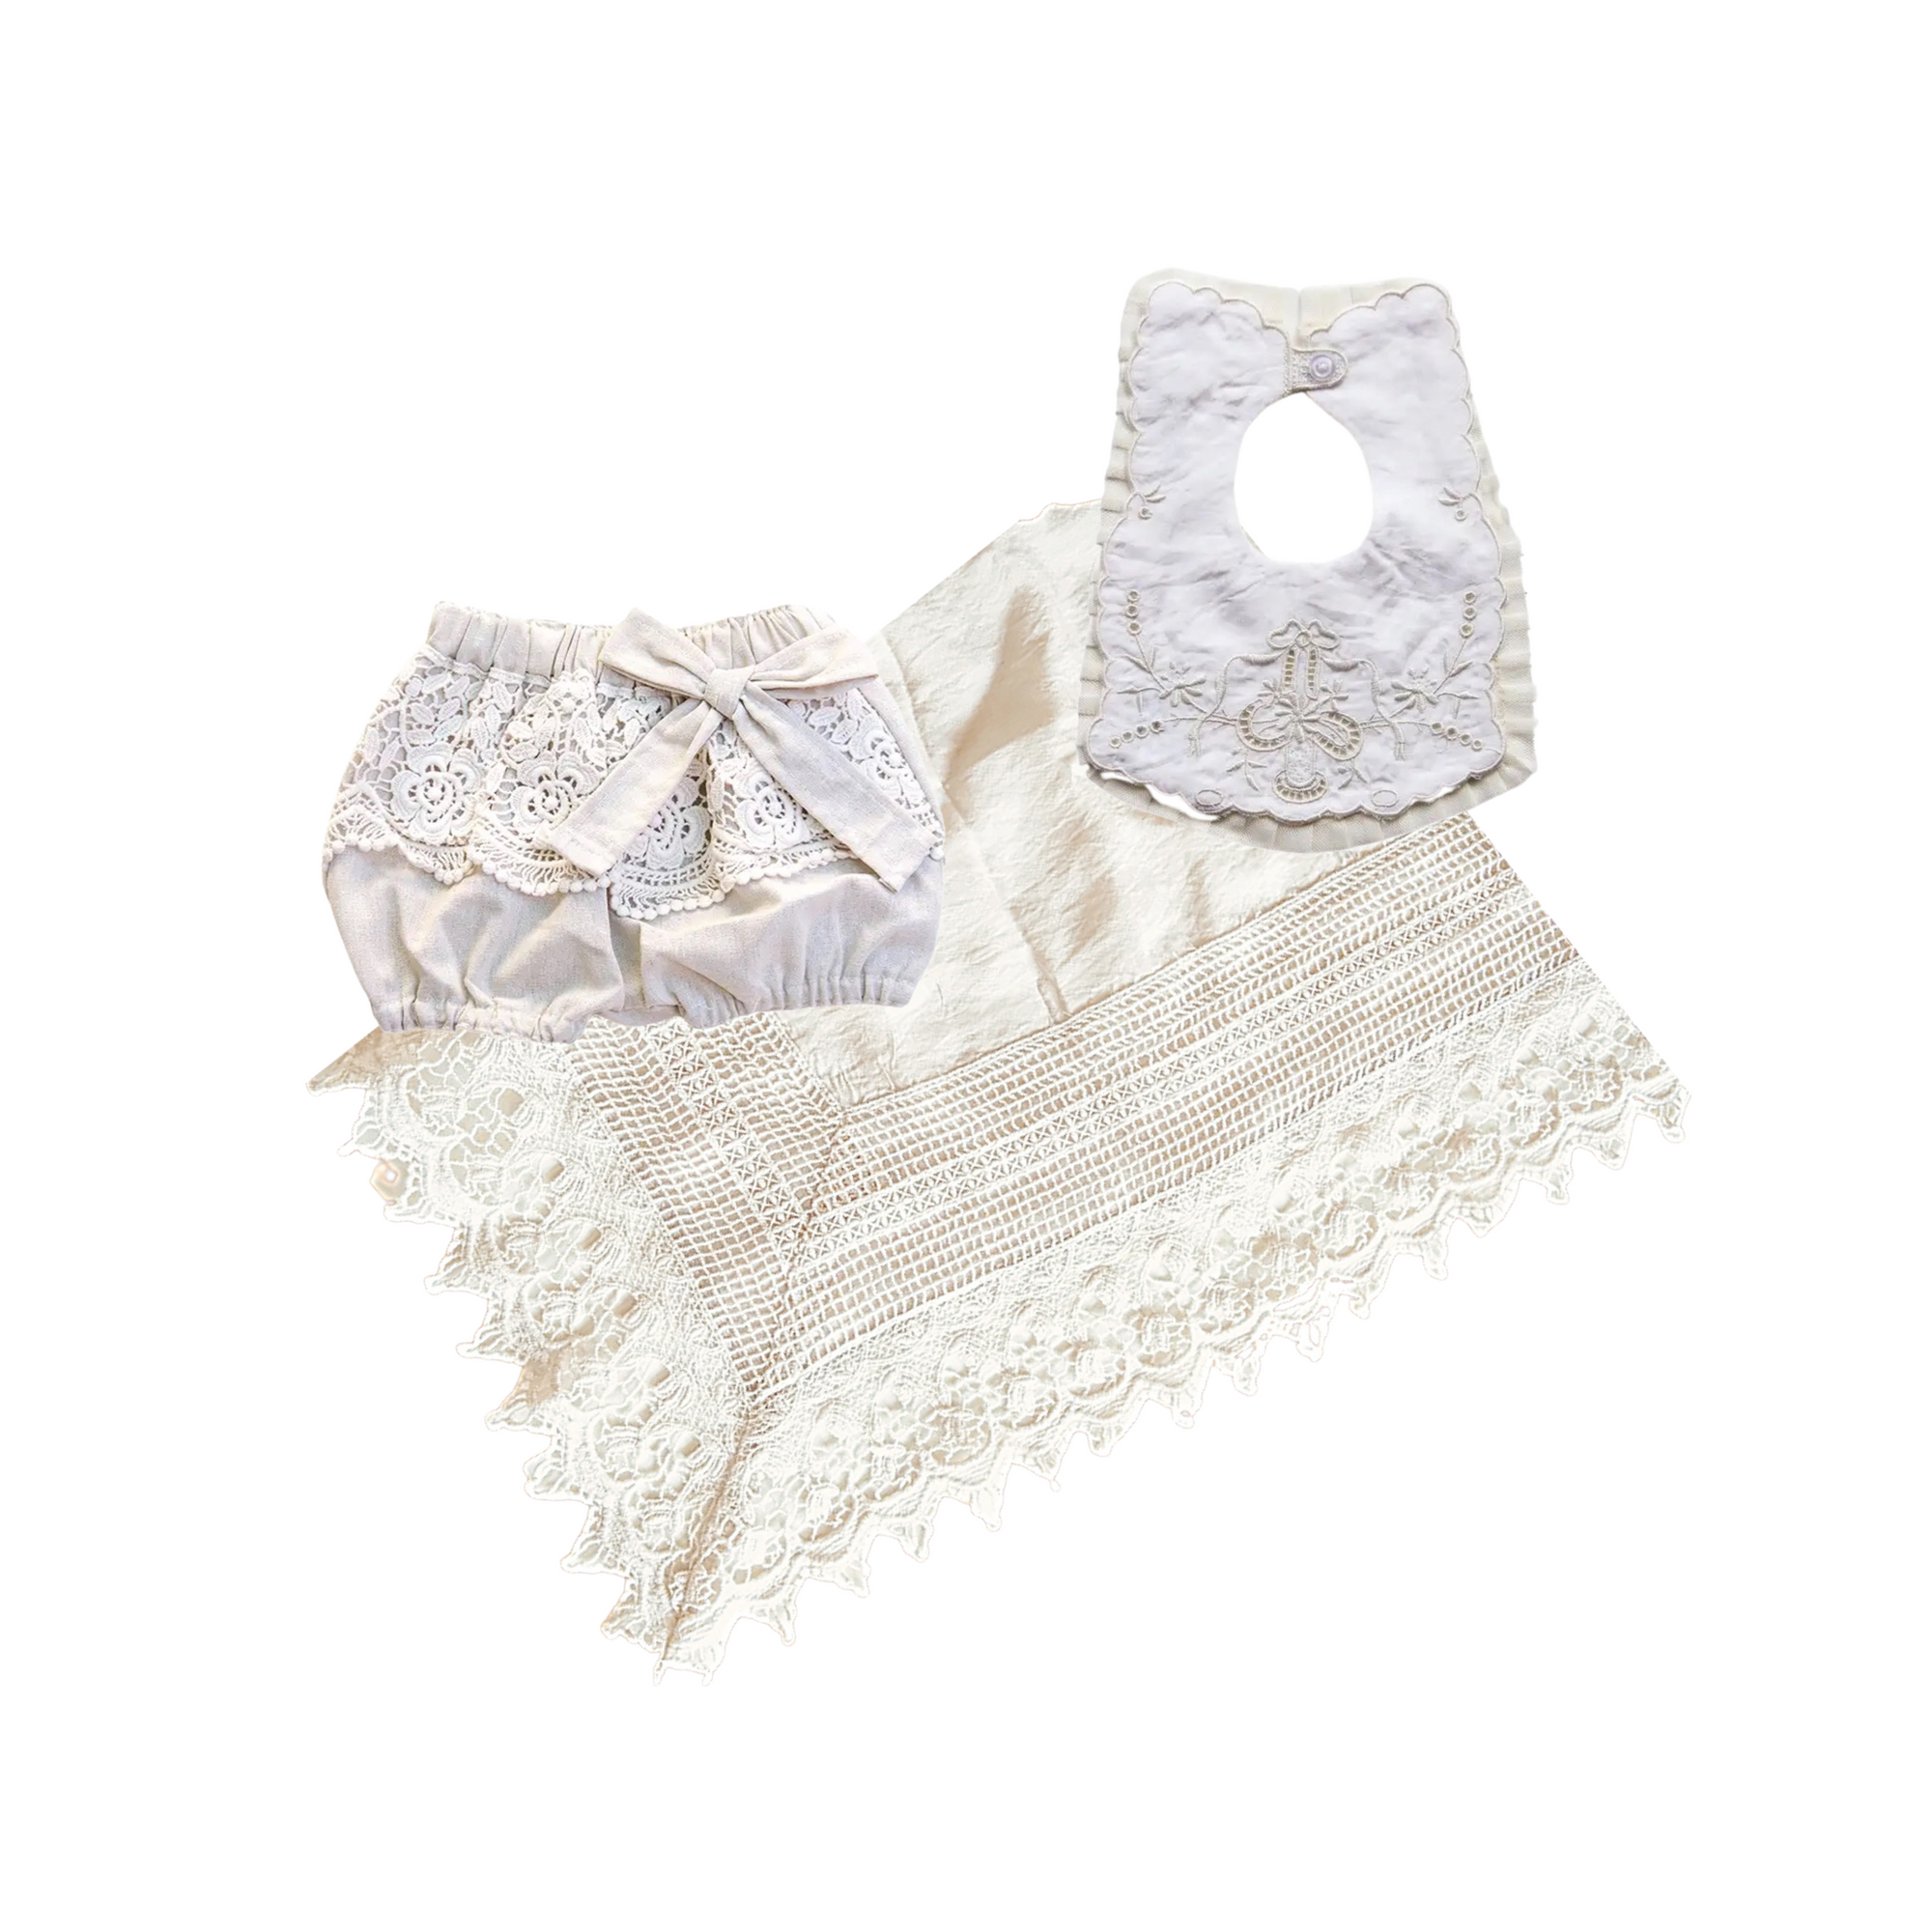 Linen & Lace Heirloom Bloomers